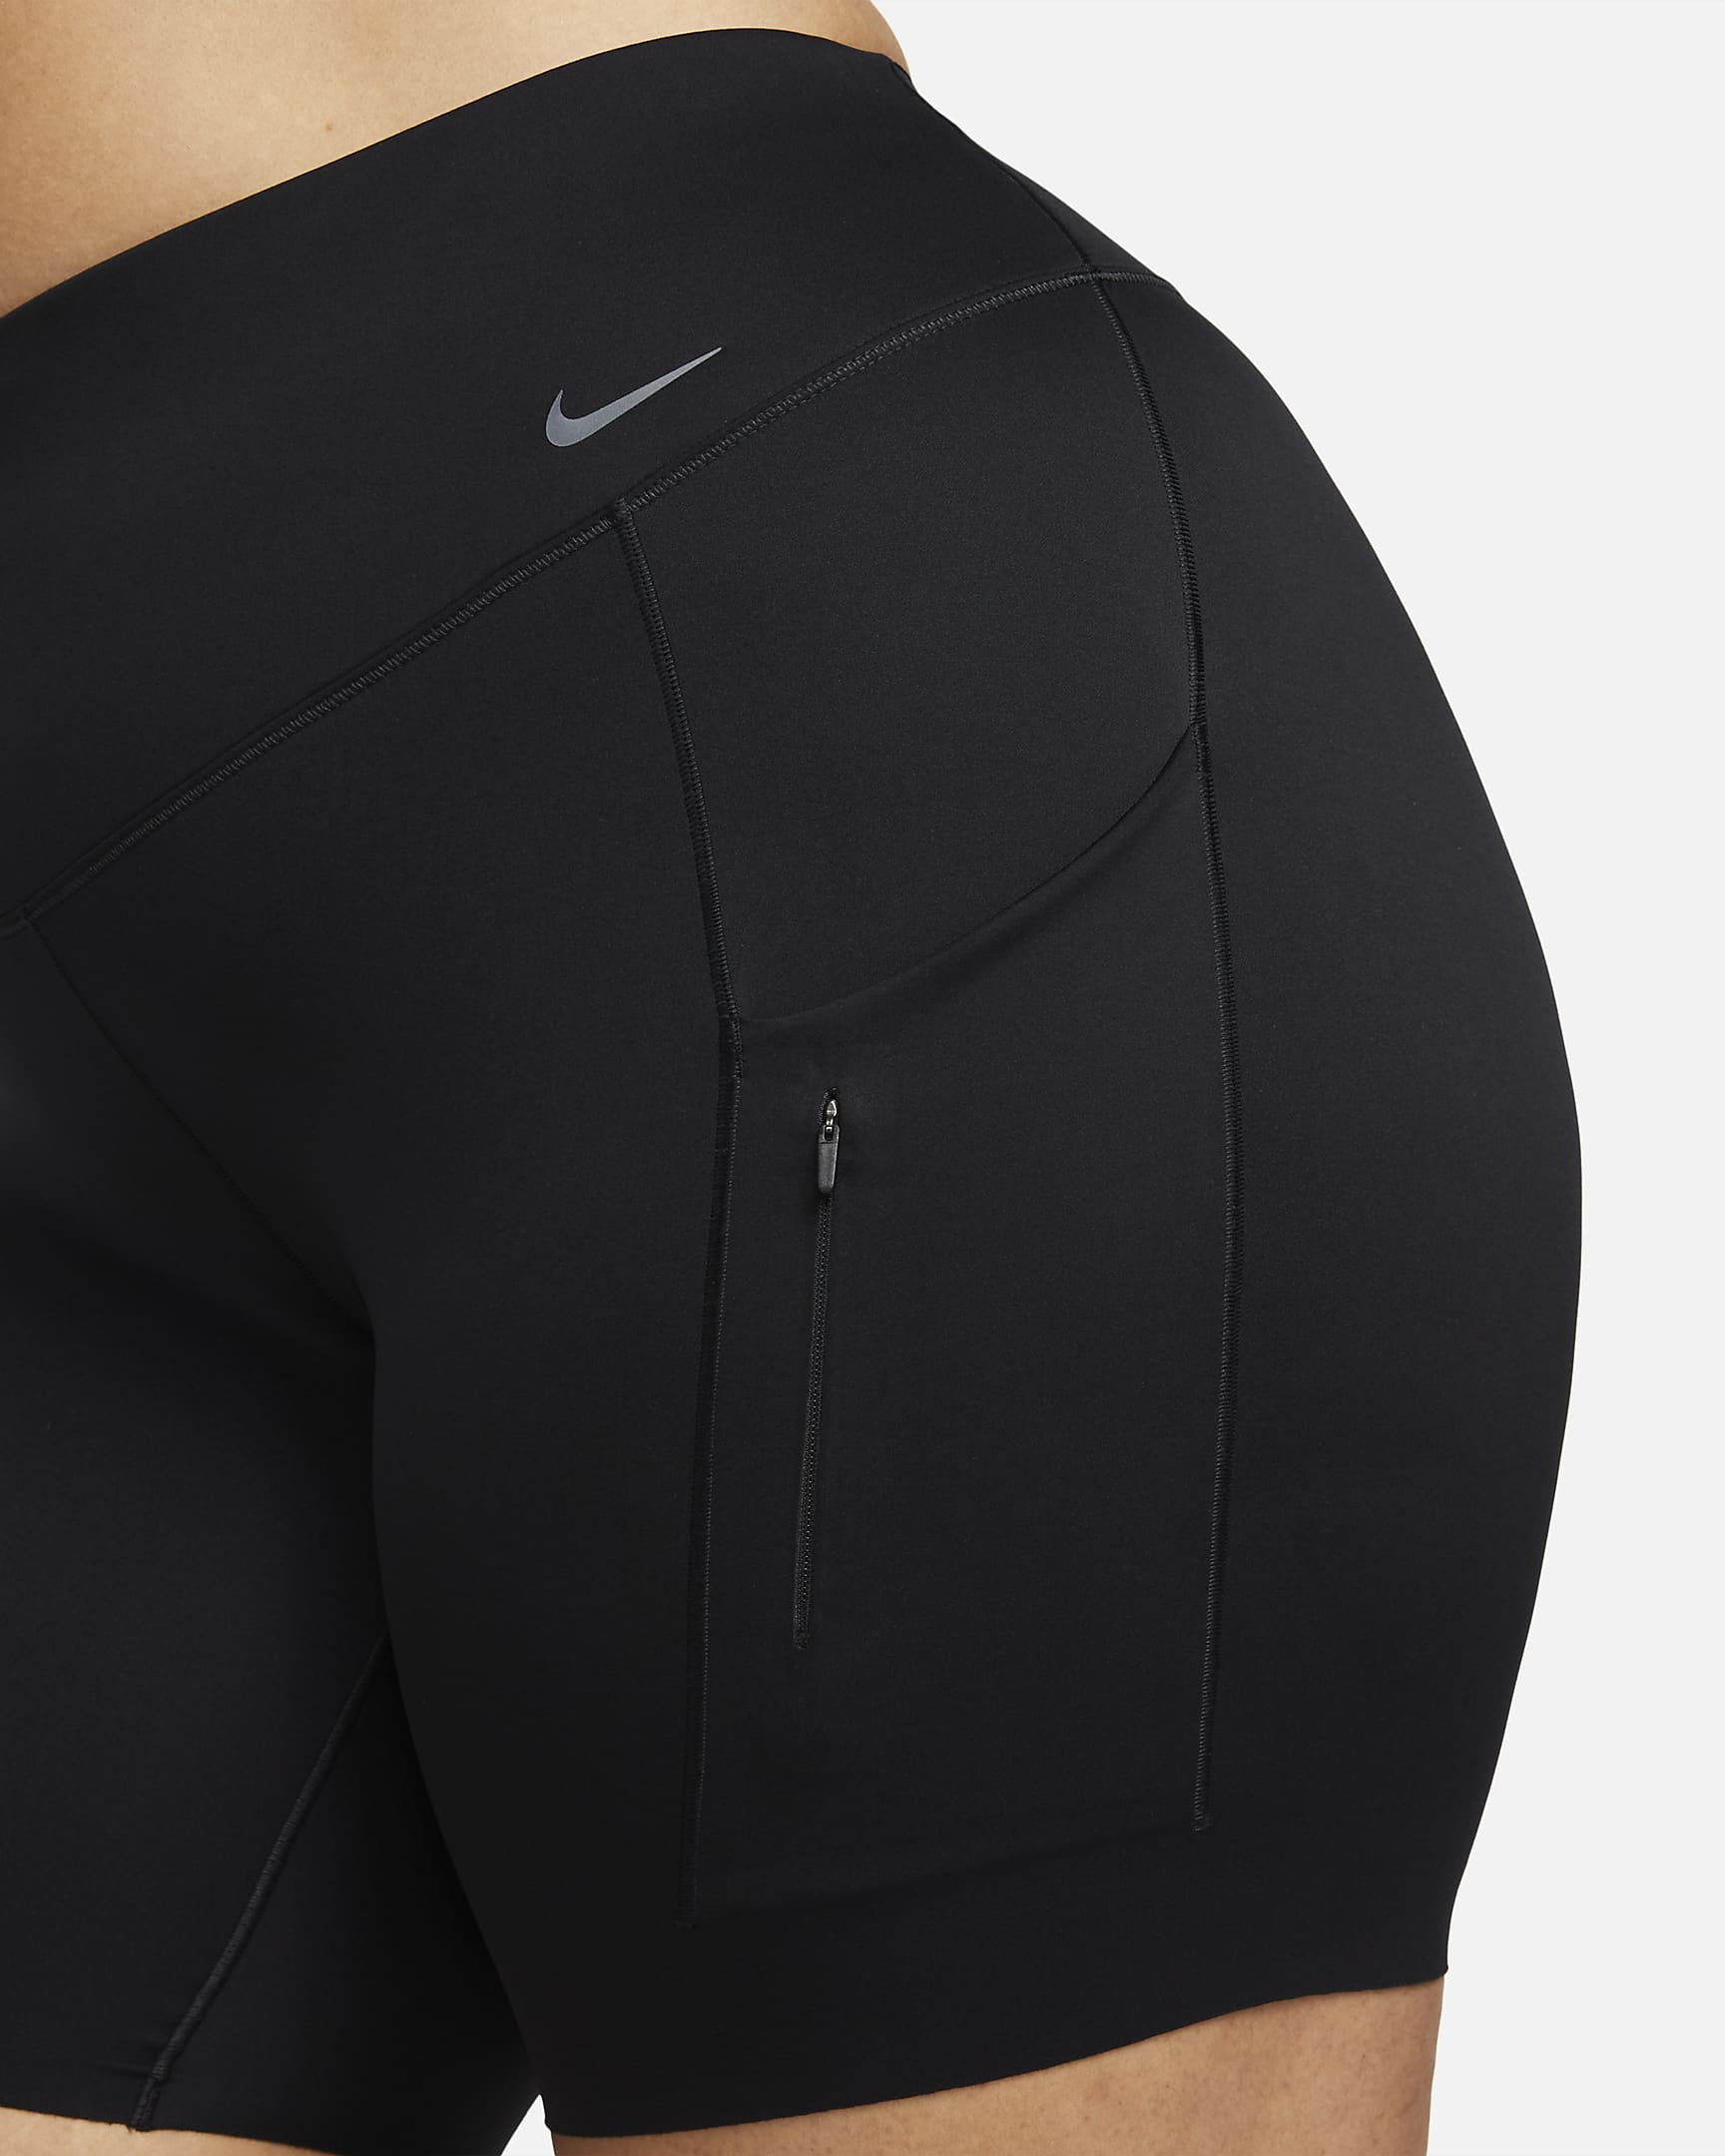 Nike Go Women's Firm-Support High-Waisted 20cm (approx.) Biker Shorts with Pockets (Plus Size) - Black/Black